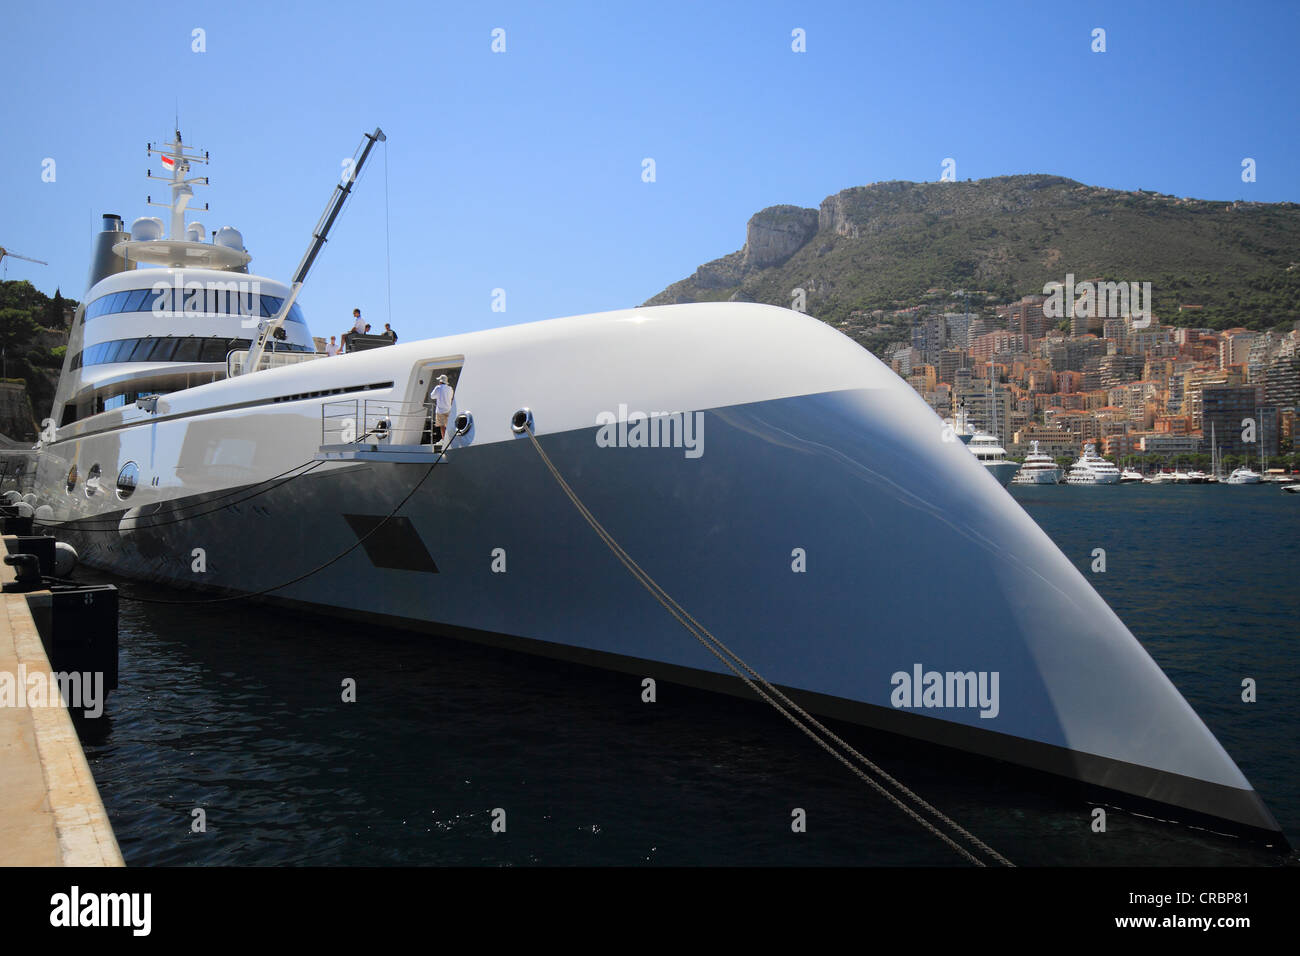 Motor yacht, A, built by Blohm + Voss GmbH, overall length, 119 metres, built in 2008, owned by Andrei Melnichenko Stock Photo